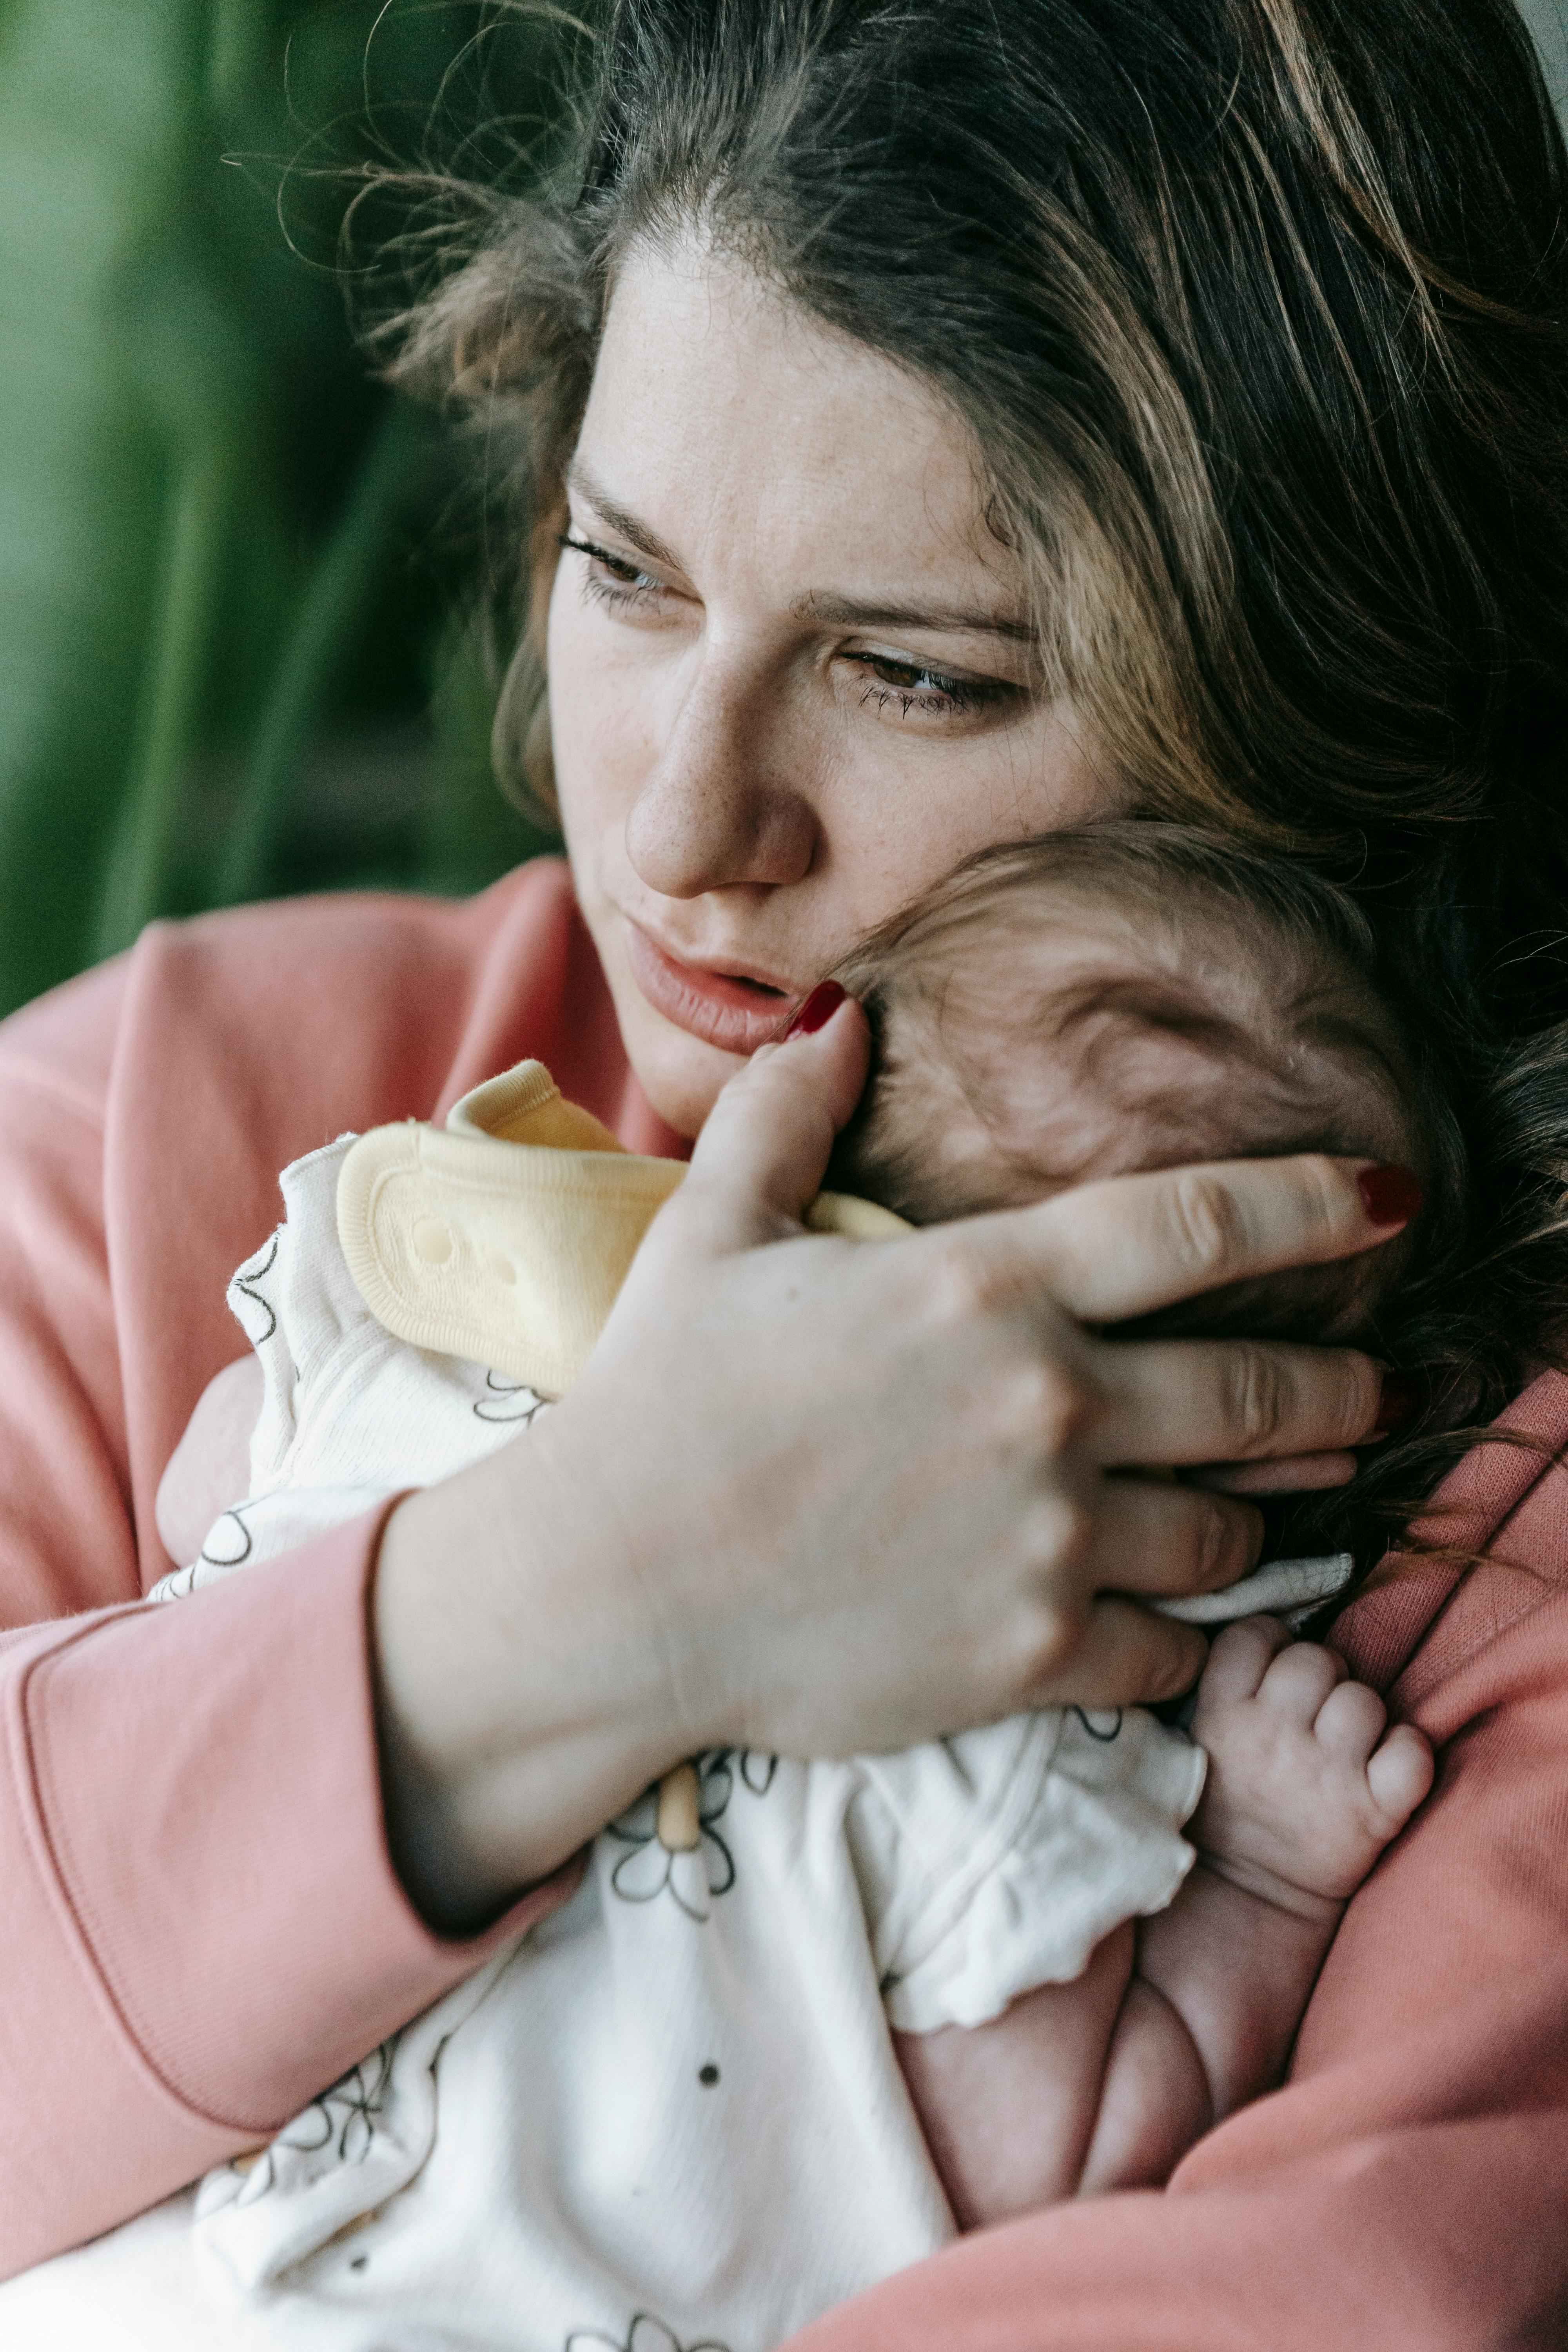 An unhappy woman holding a newborn baby | Source: Pexels